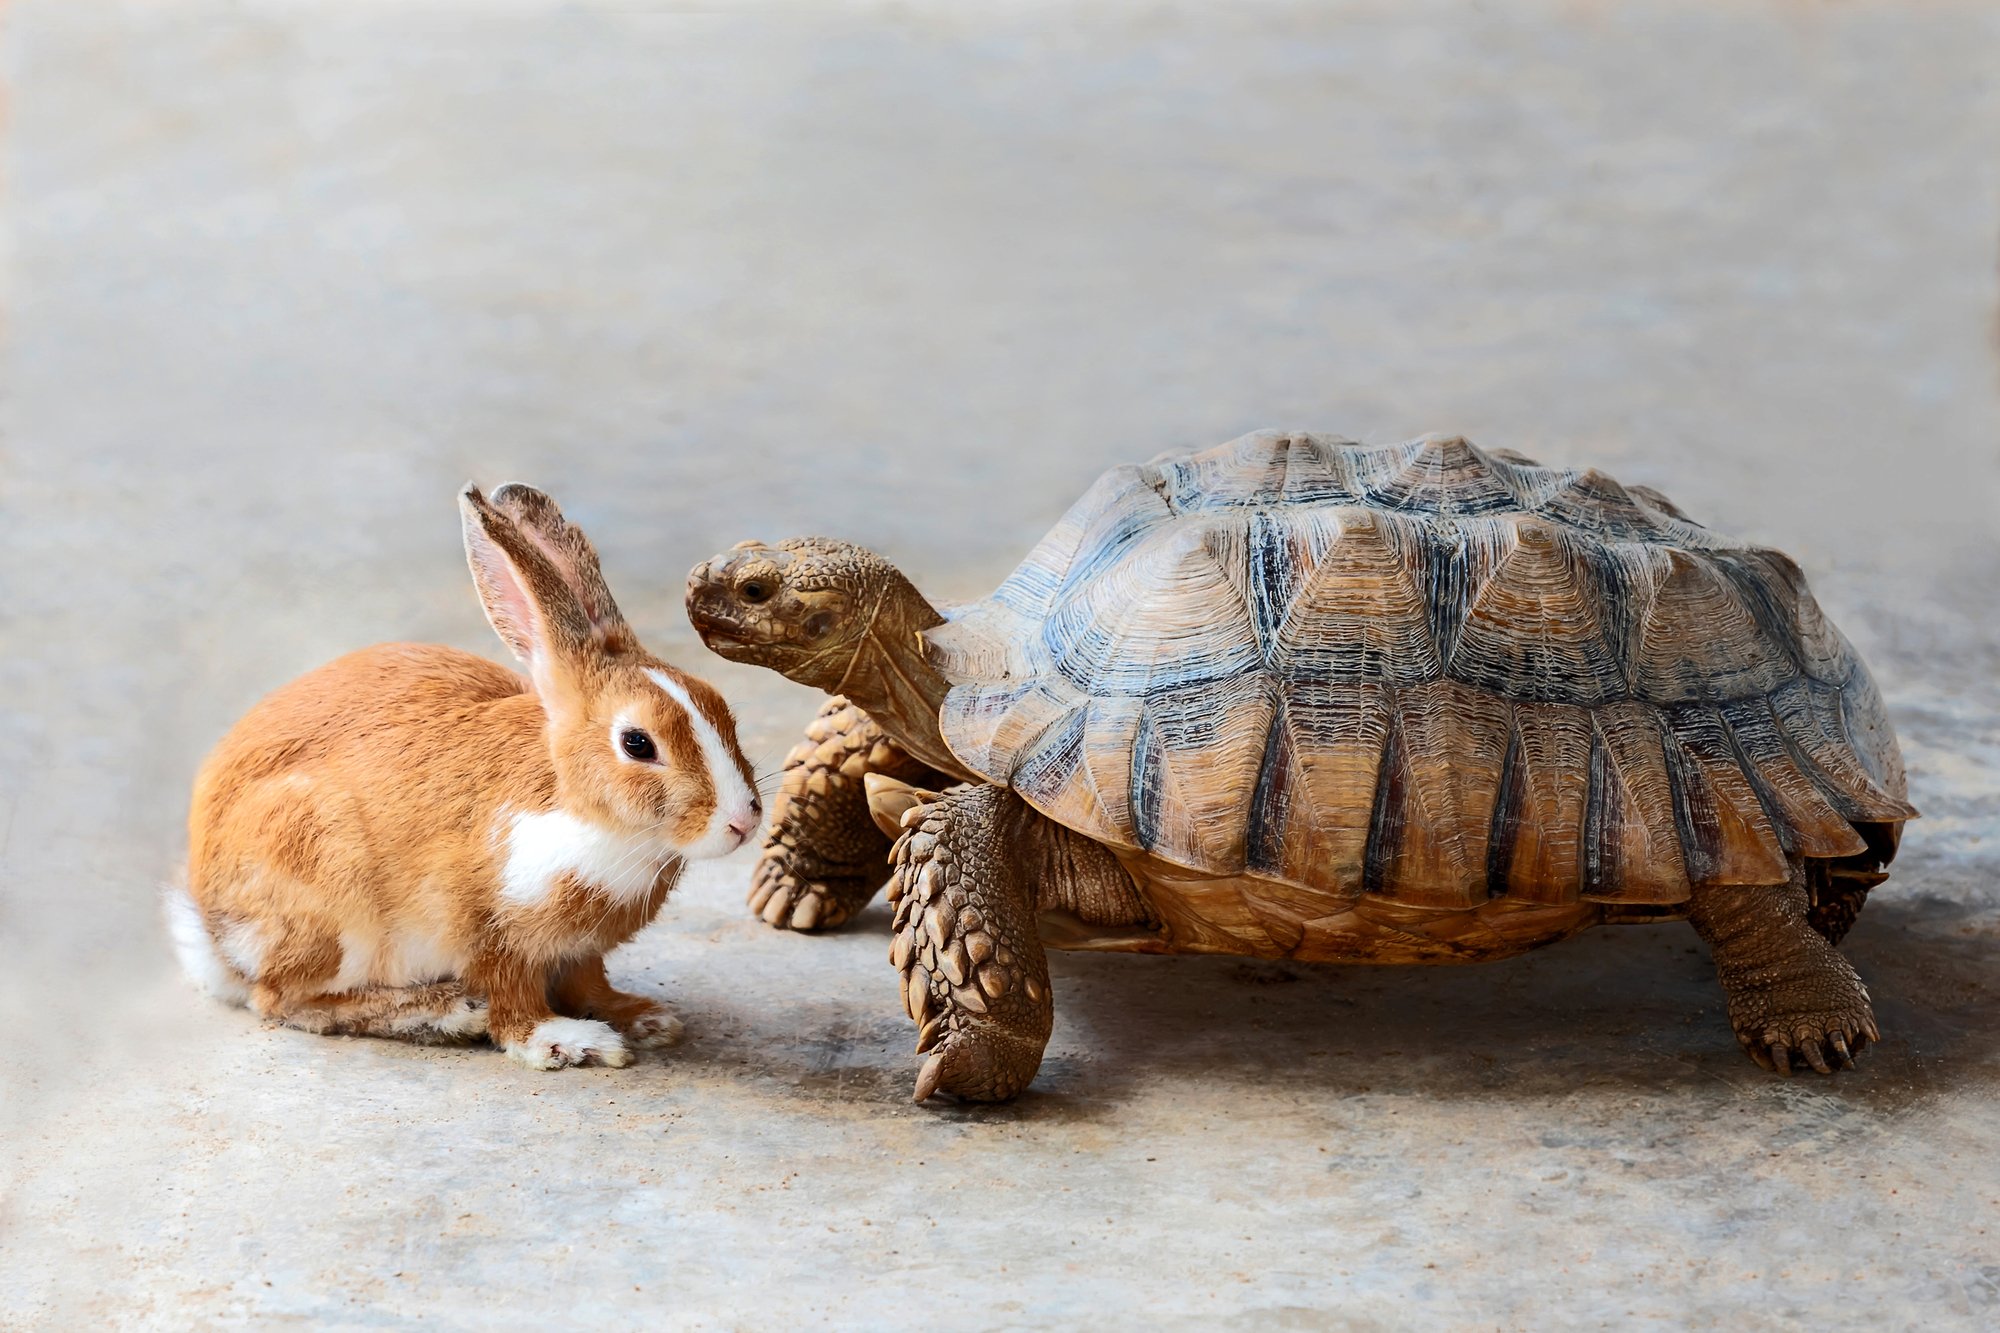 Rabbit and turtle are discussing the competition